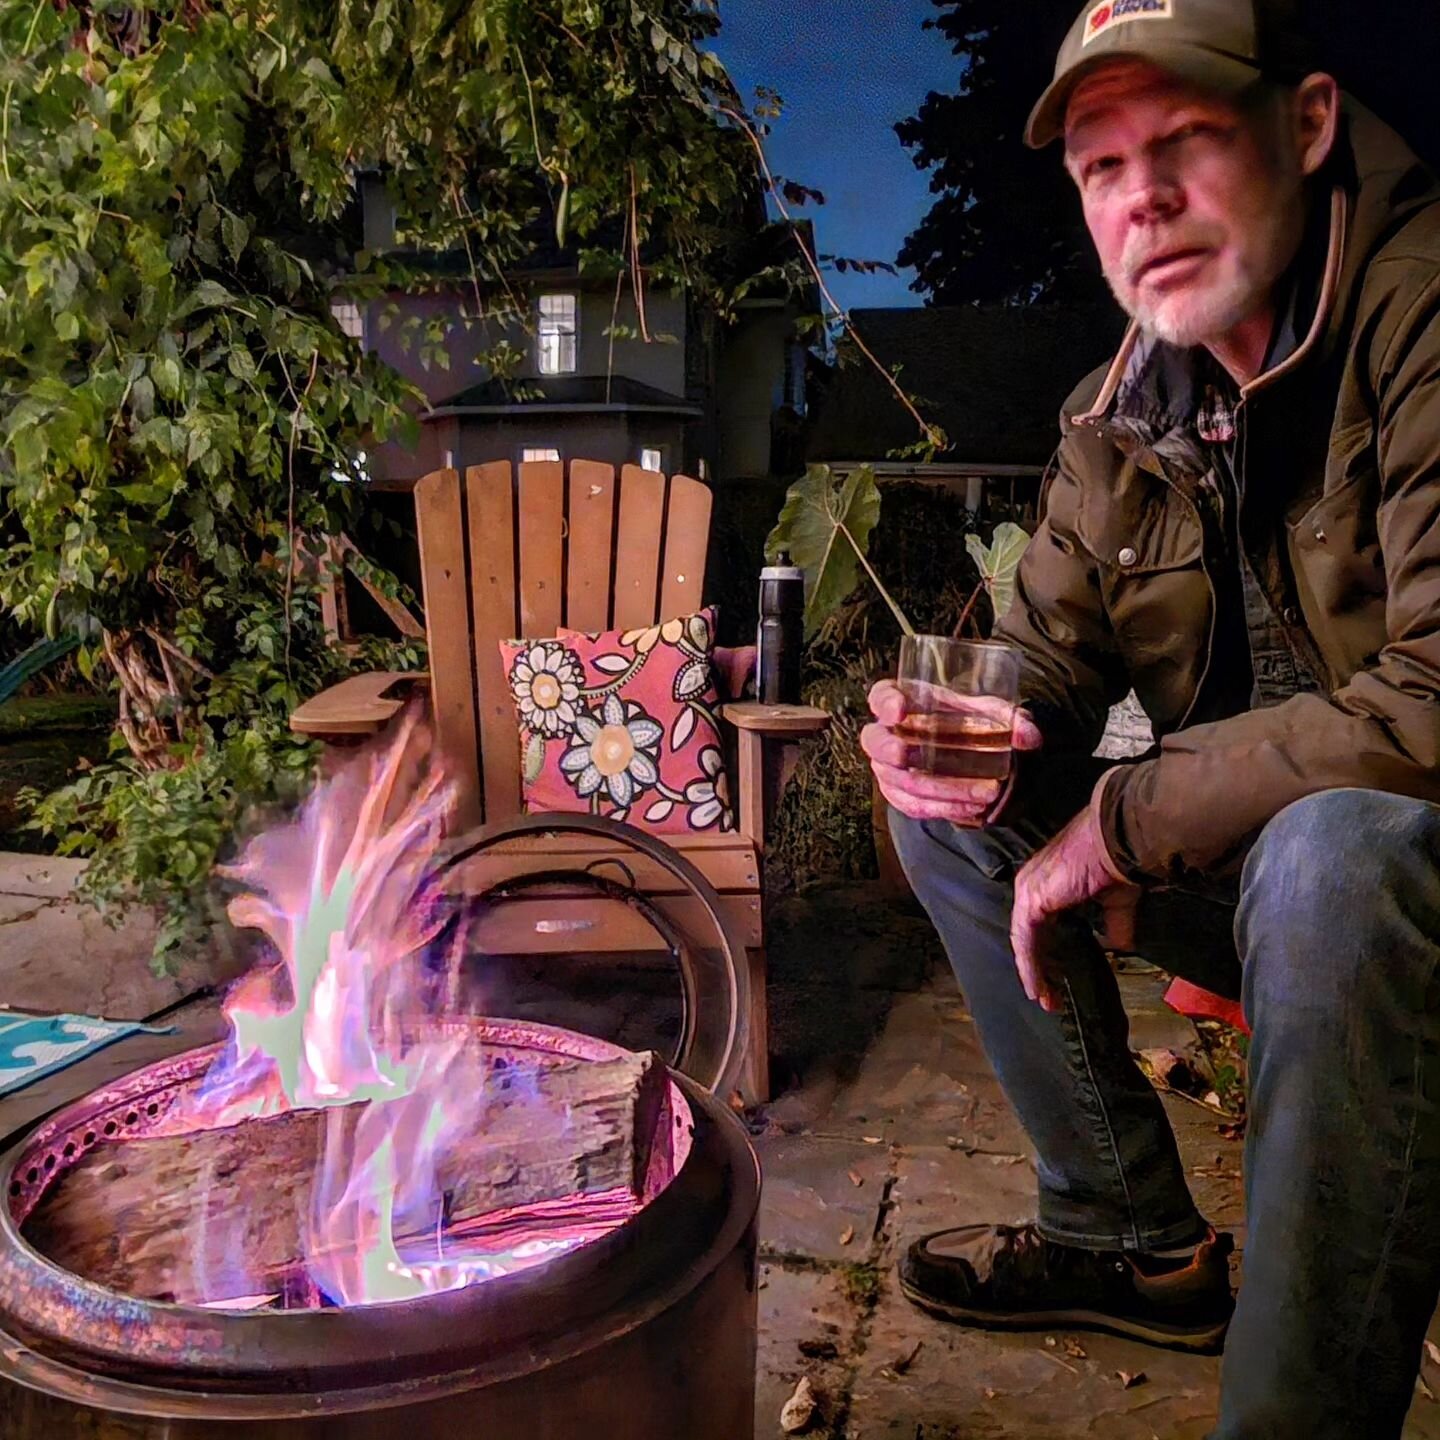 Attorney client privileges.  McHugh Law and BHT discuss the local market over whiskey and fire.